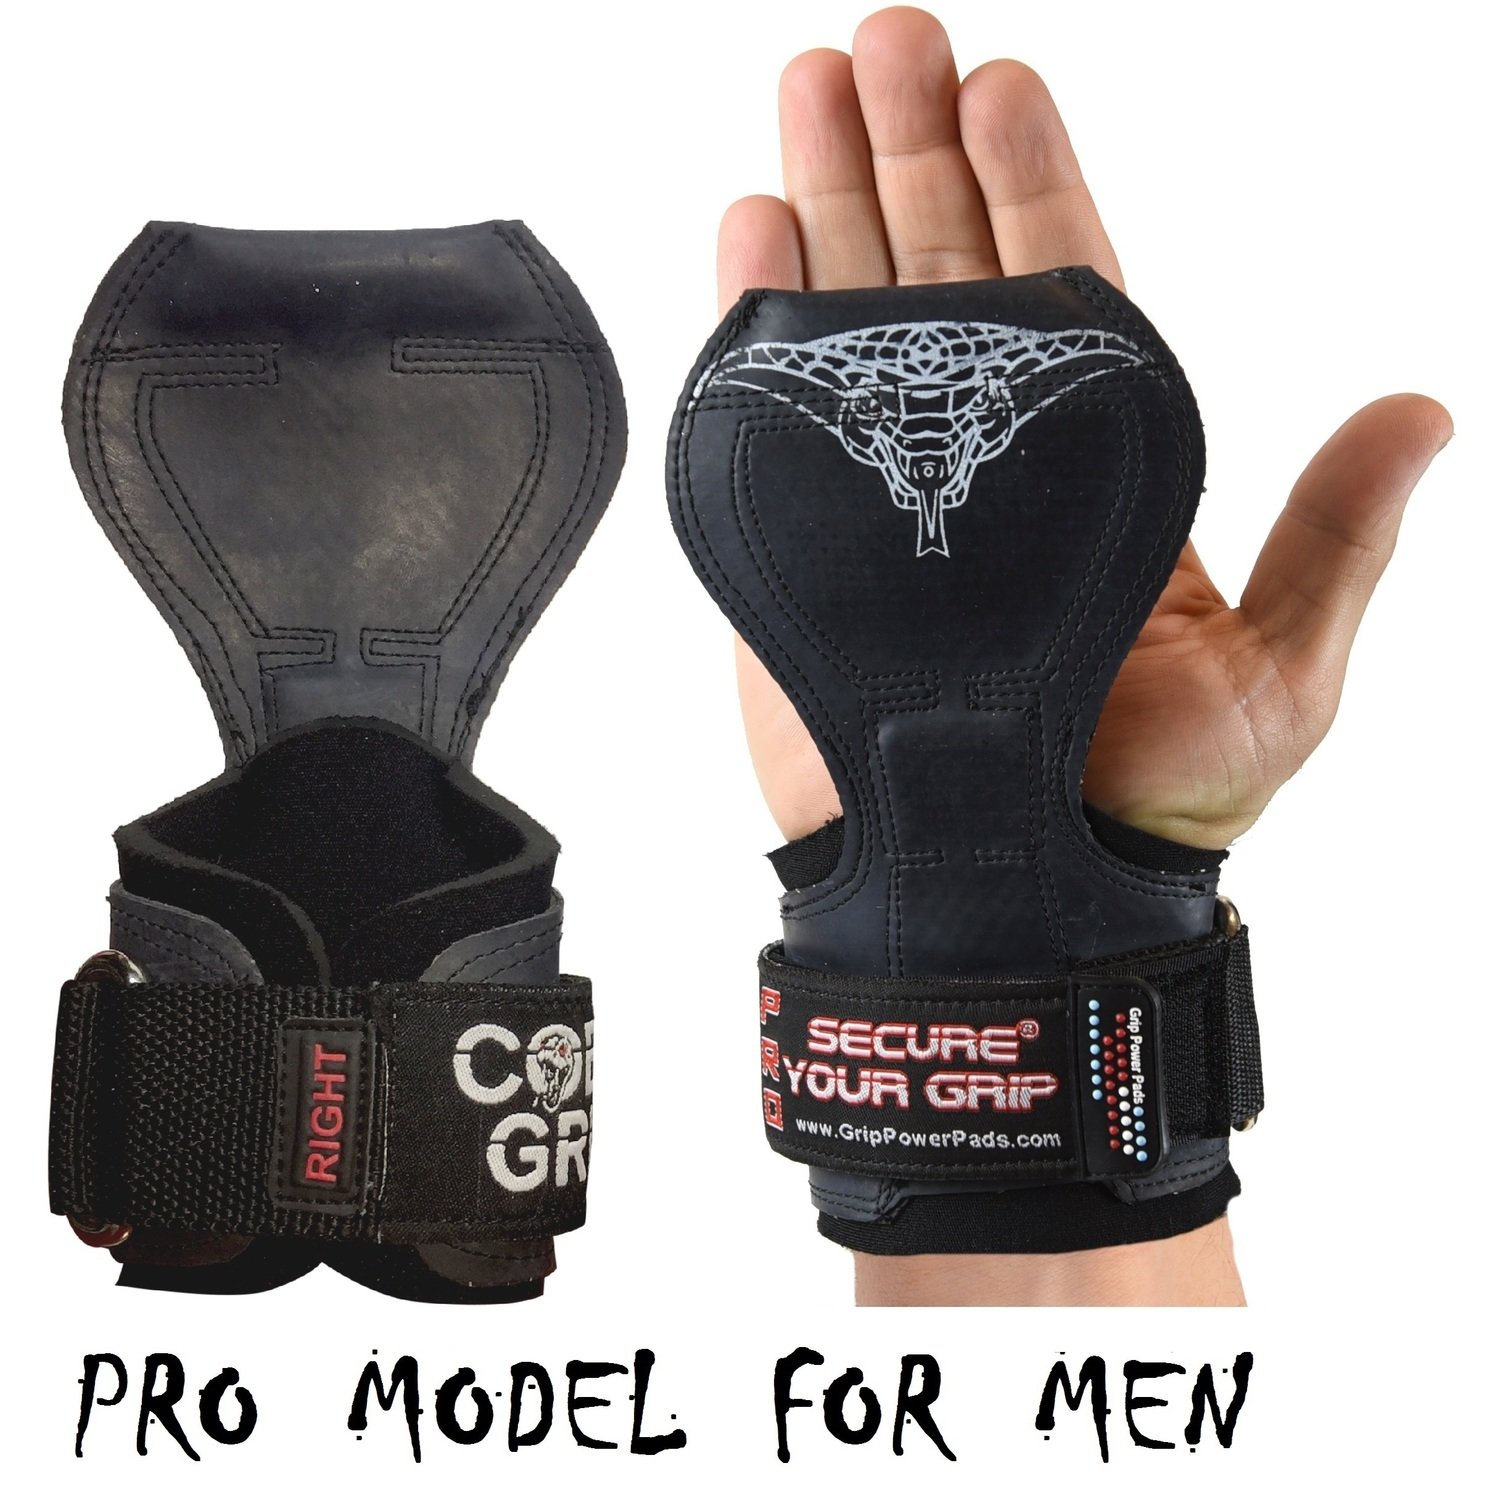 Cobra Grips PRO Limited Edition Gym Body Building Hooks Gloves Sports  Weight Lifting Grips - Get Online Your Grip Power Pads 